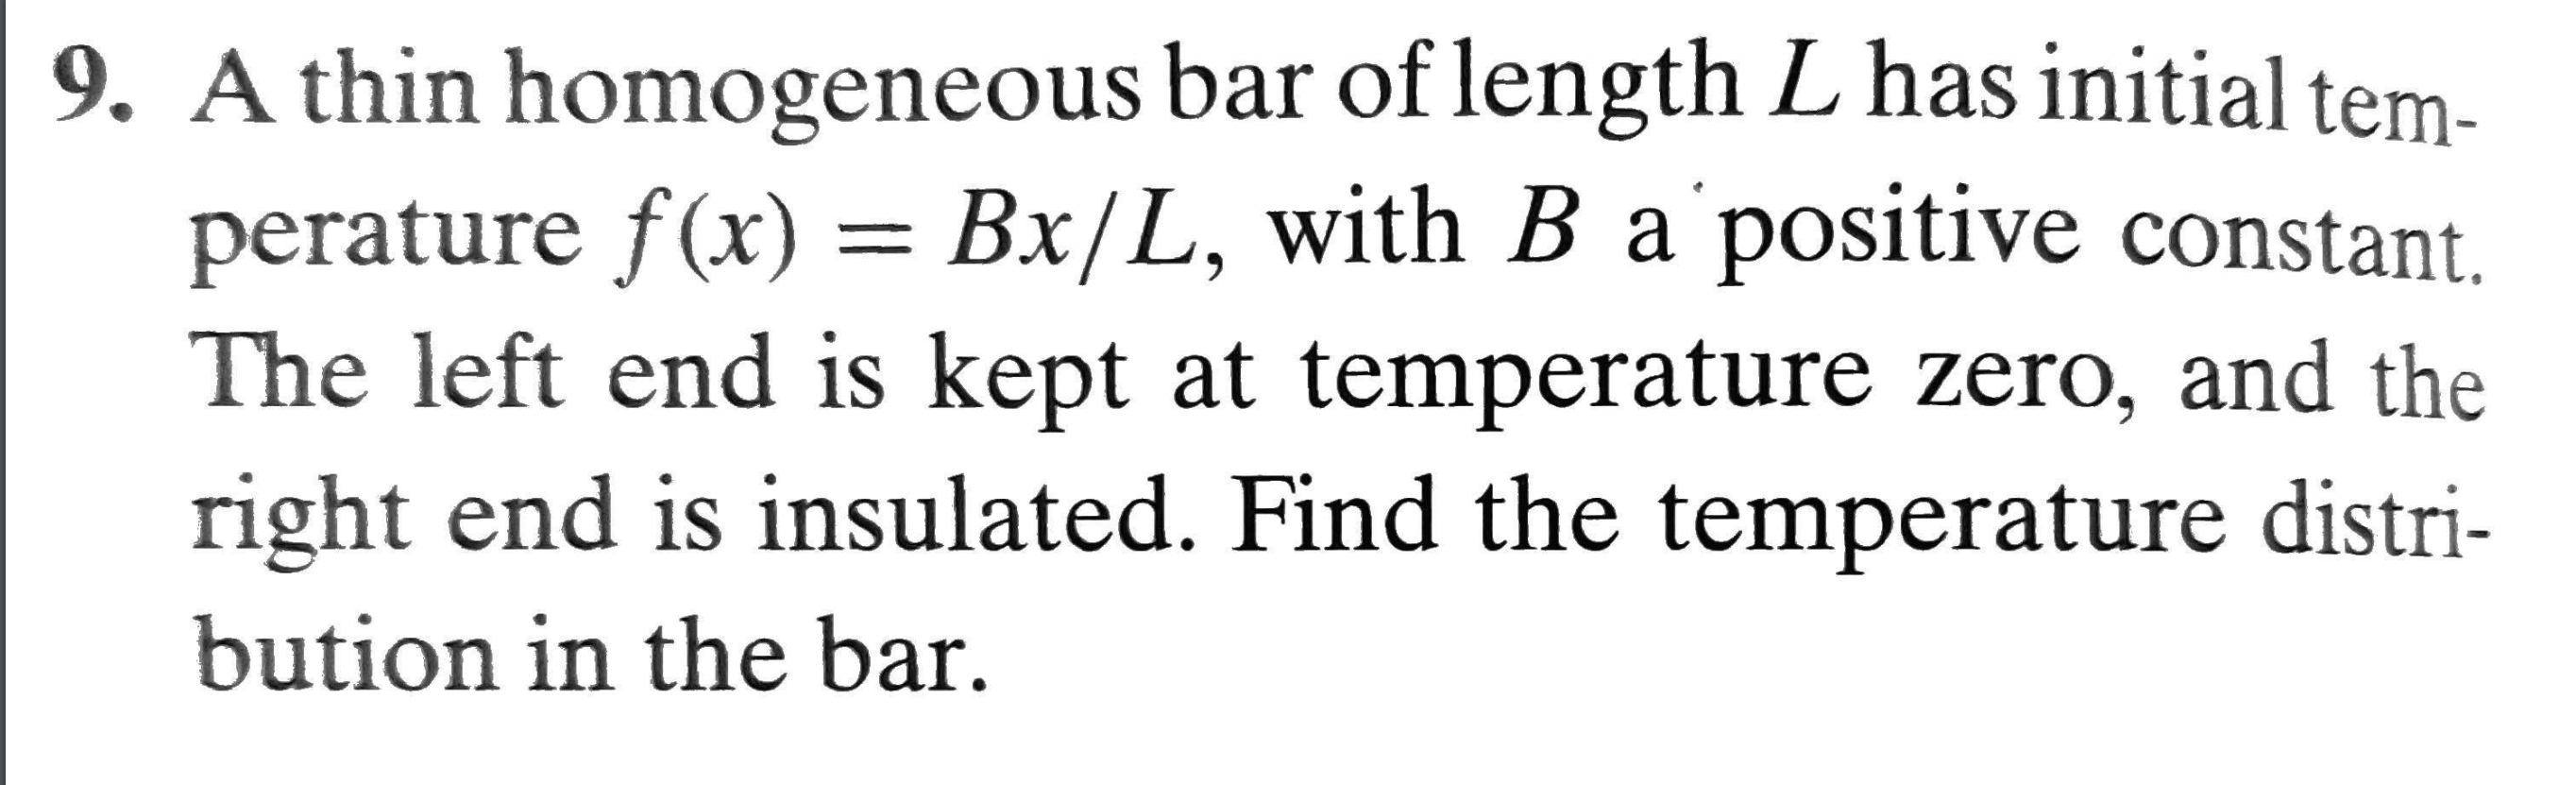 9. A thin homogeneous bar of length L has initial tem-
perature f(x) = Bx/L, with B a positive constant.
The left end is kept at temperature zero, and the
right end is insulated. Find the temperature distri-
bution in the bar.
